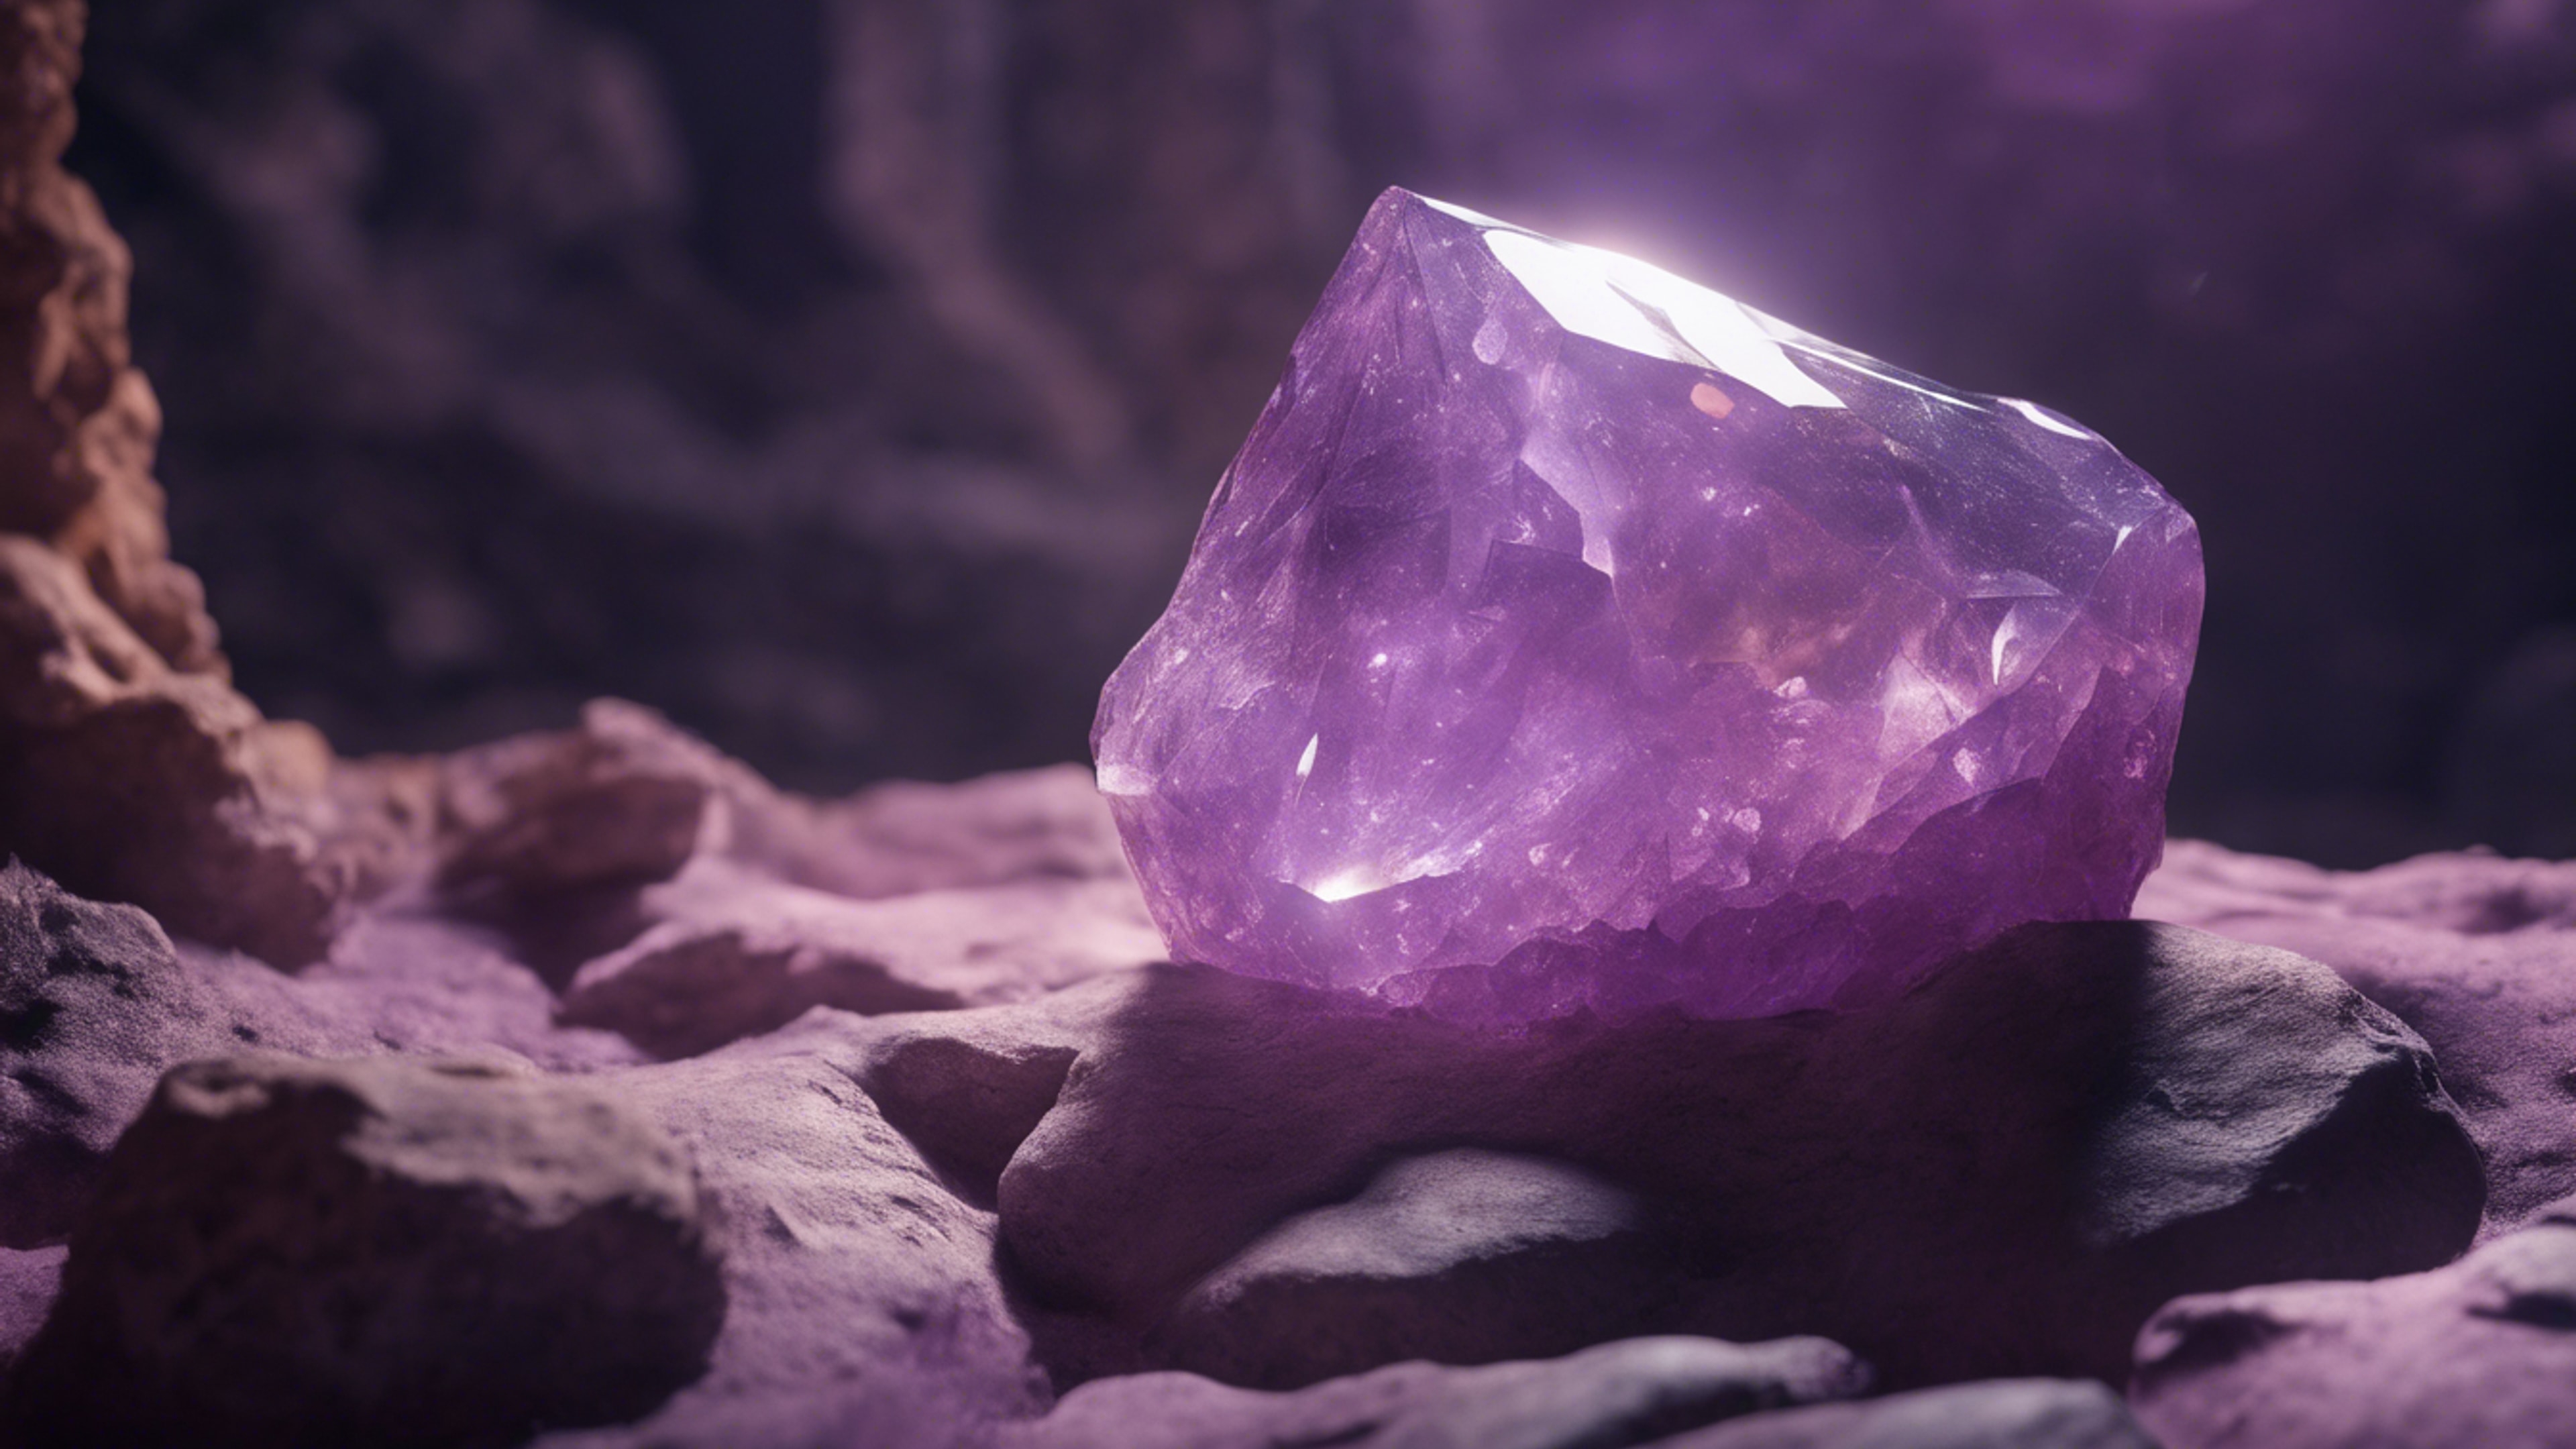 A mysterious light purple crystal glowing softly in an ancient cavern. Wallpaper[c102c8649b0a49ffbc87]